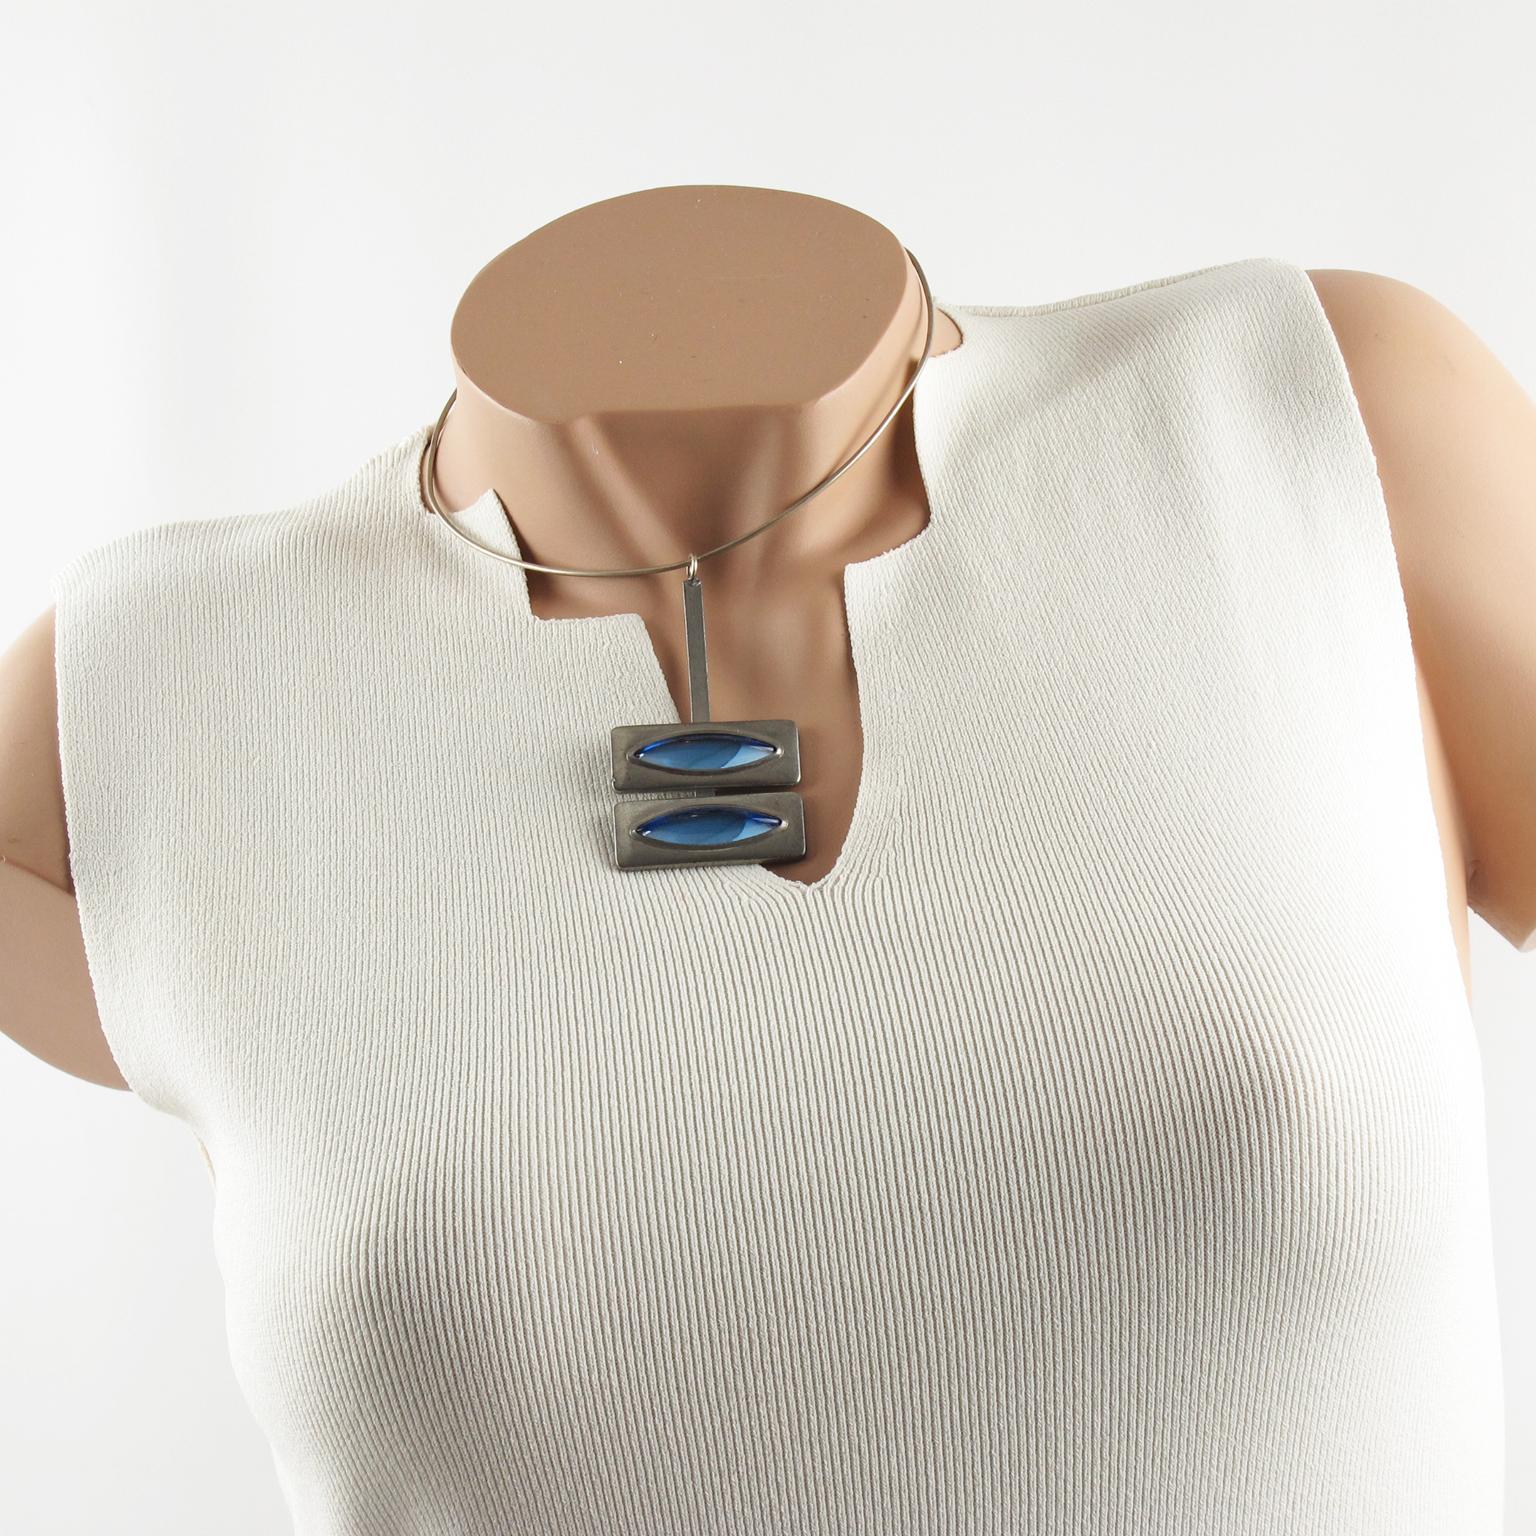 Danish jewelry artist Jorgen Jensen designed this elegant Space Age modernist collar pendant-necklace. The piece is all made in pewter with arctic blue poured glass cabochons. The artist's signature is at the back and reads Pewter - Jorgen Jensen -